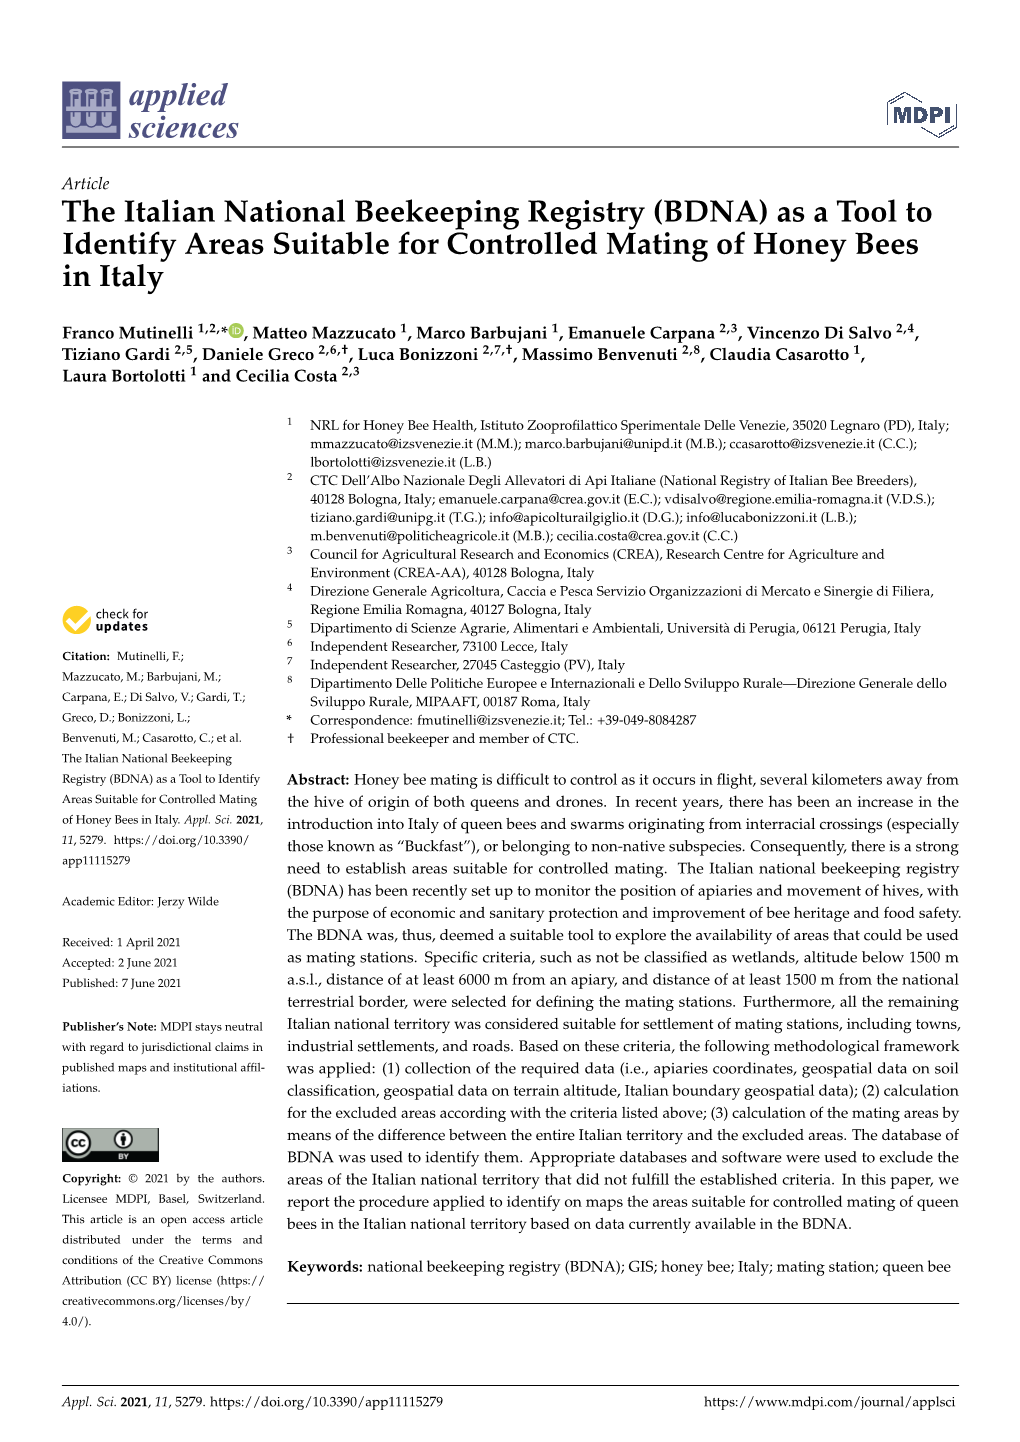 The Italian National Beekeeping Registry (BDNA) As a Tool to Identify Areas Suitable for Controlled Mating of Honey Bees in Italy